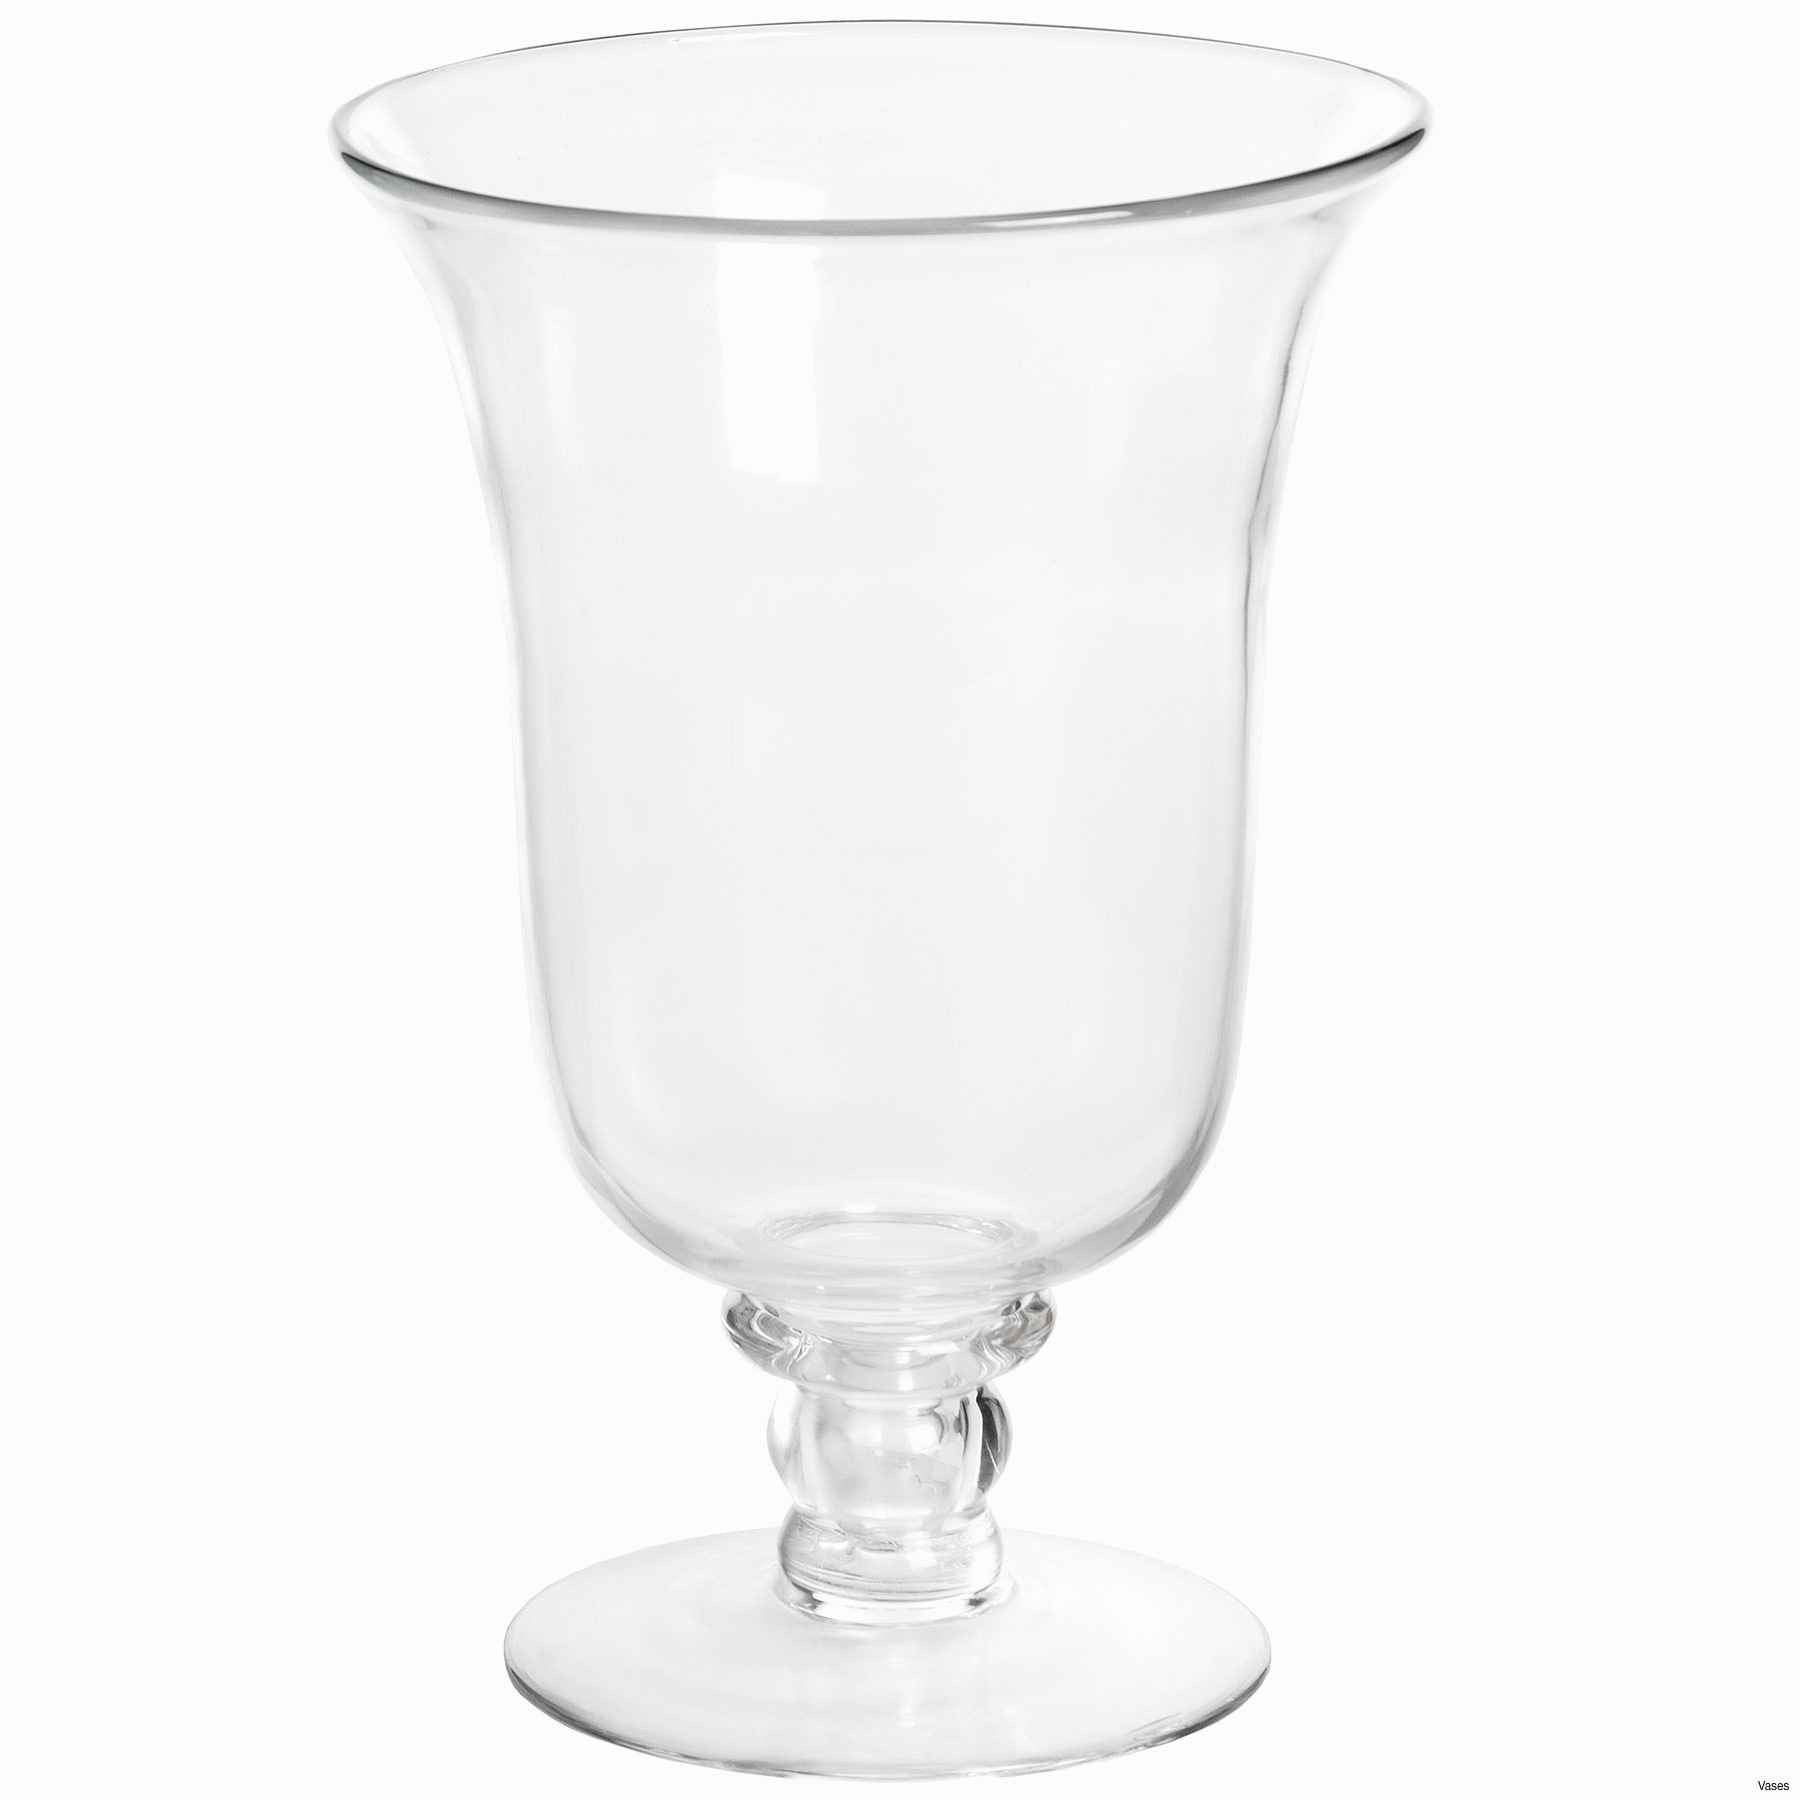 12 Unique Large Clear Vases for Cheap 2024 free download large clear vases for cheap of candle stands wholesale lovely faux crystal candle holders alive intended for candle stands wholesale lovely faux crystal candle holders alive vases gold tall 